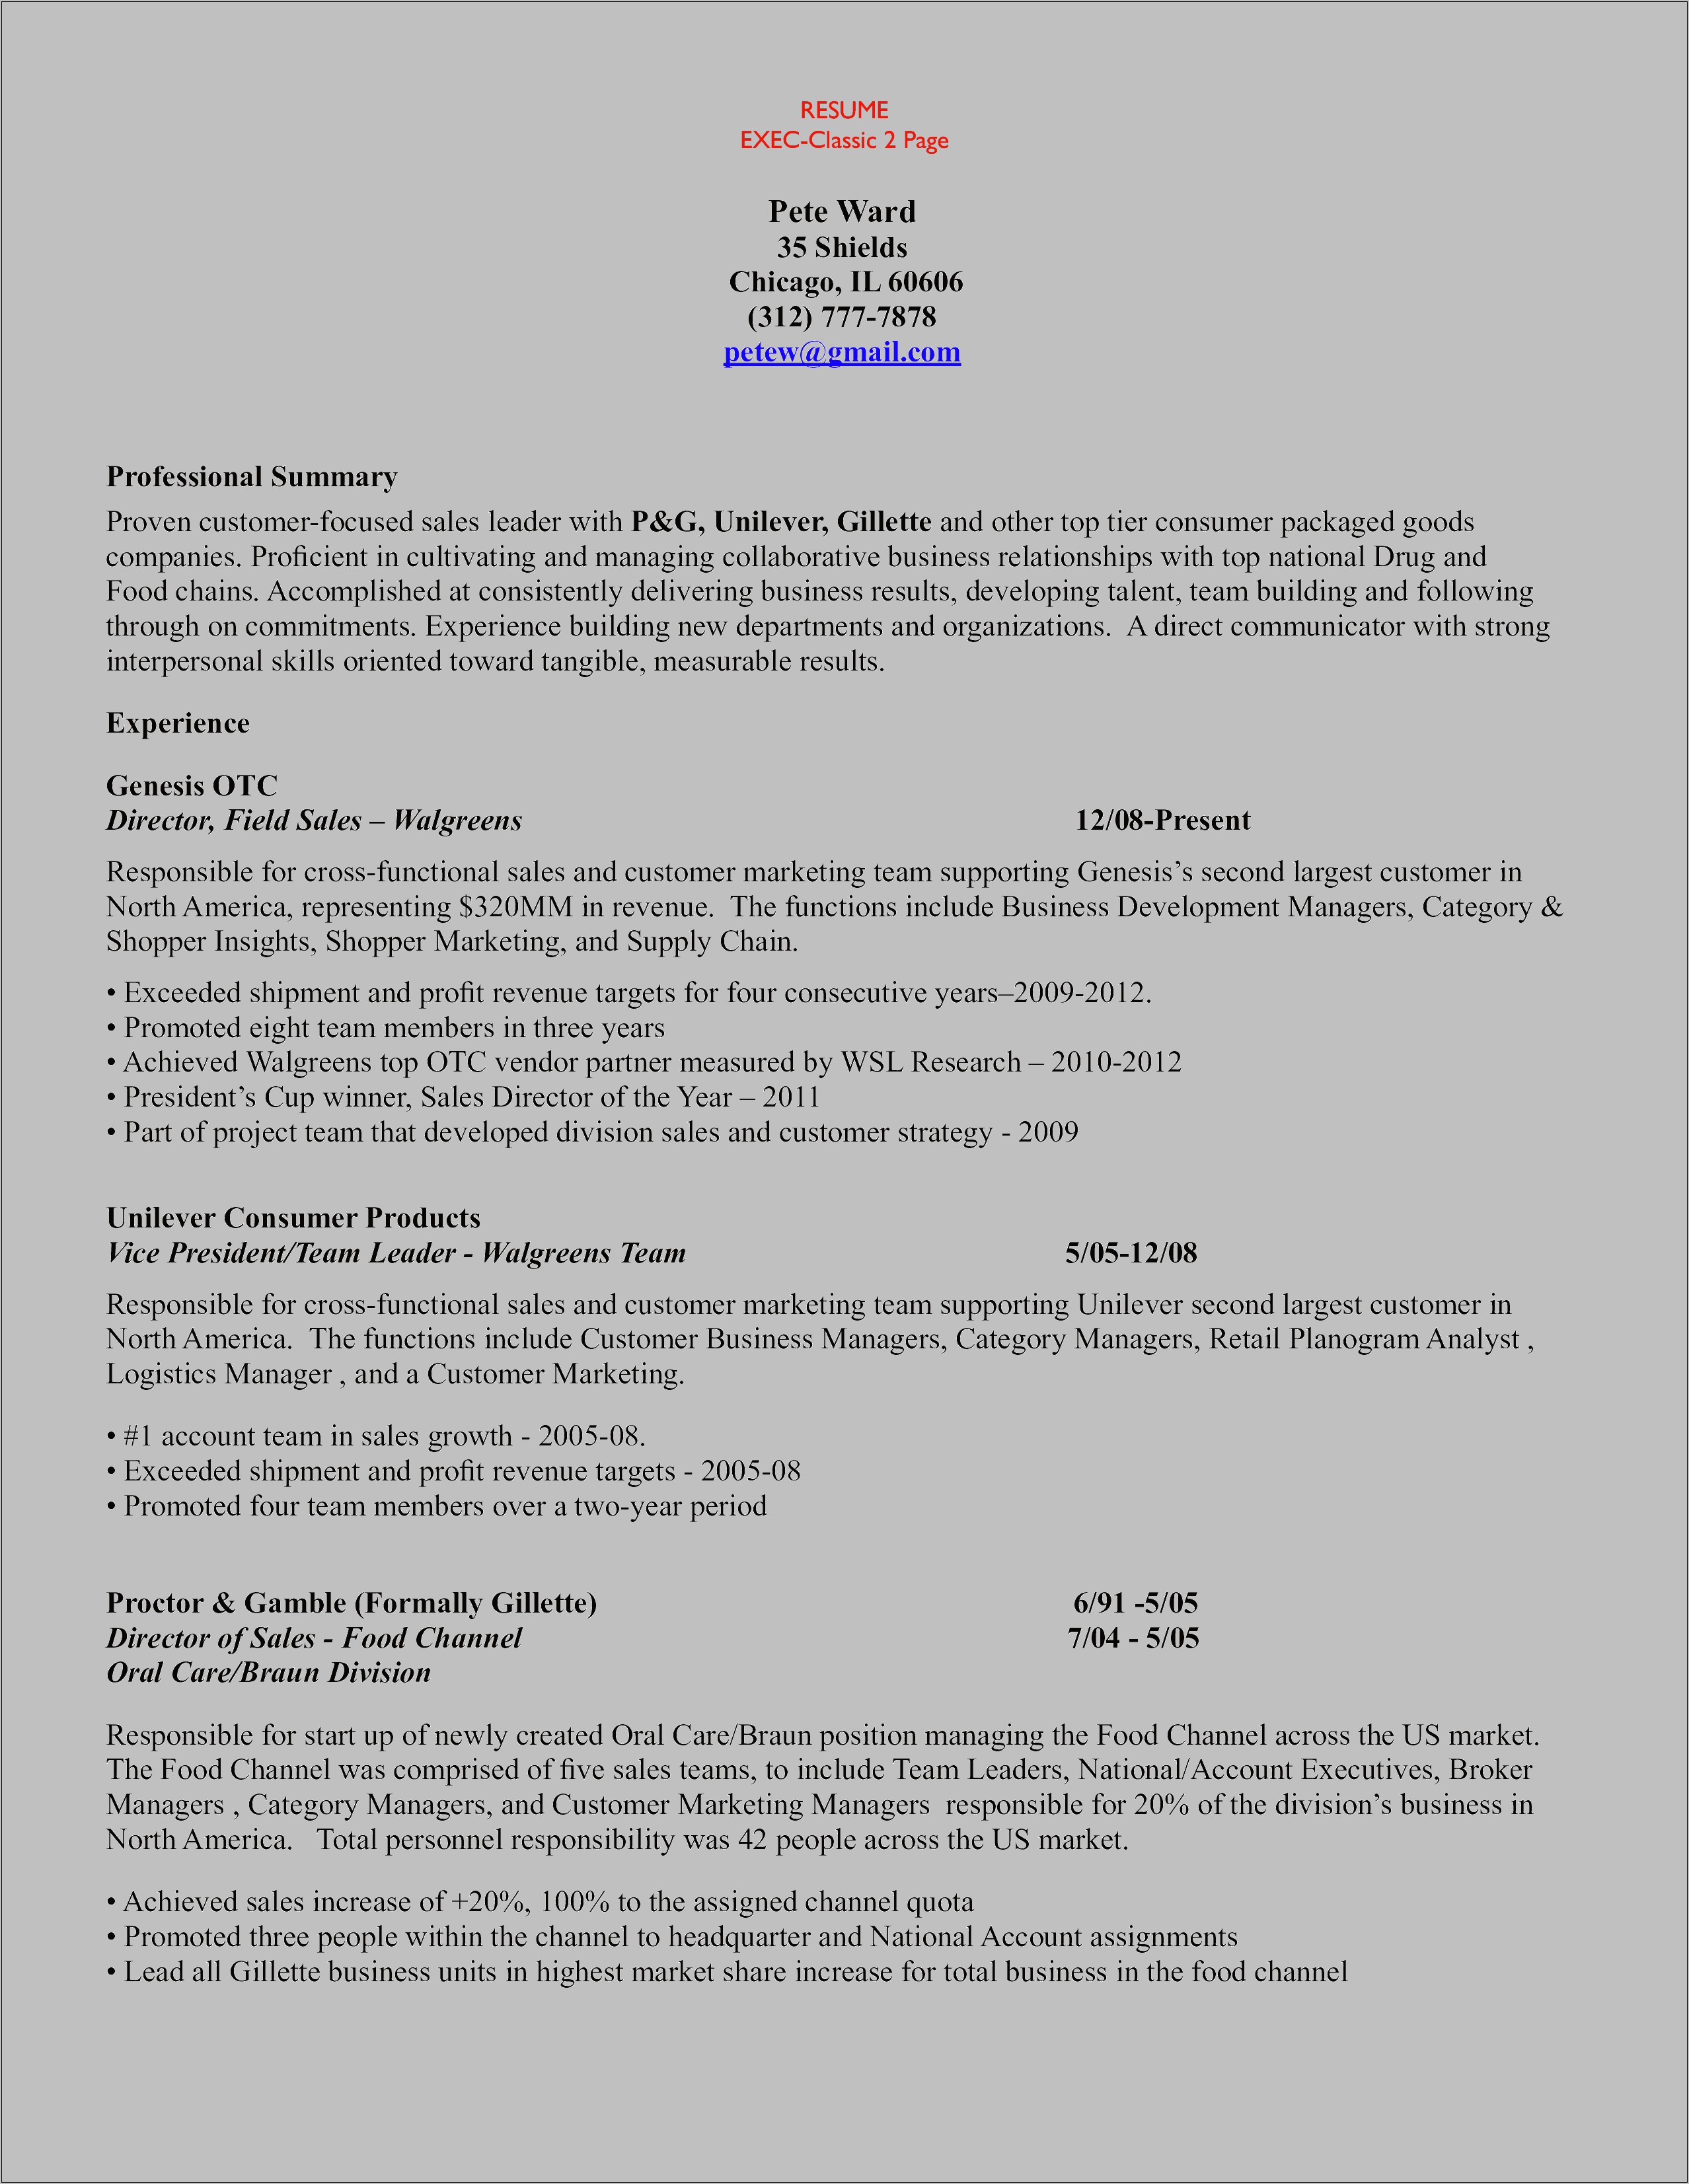 National Account Manager Resume Template